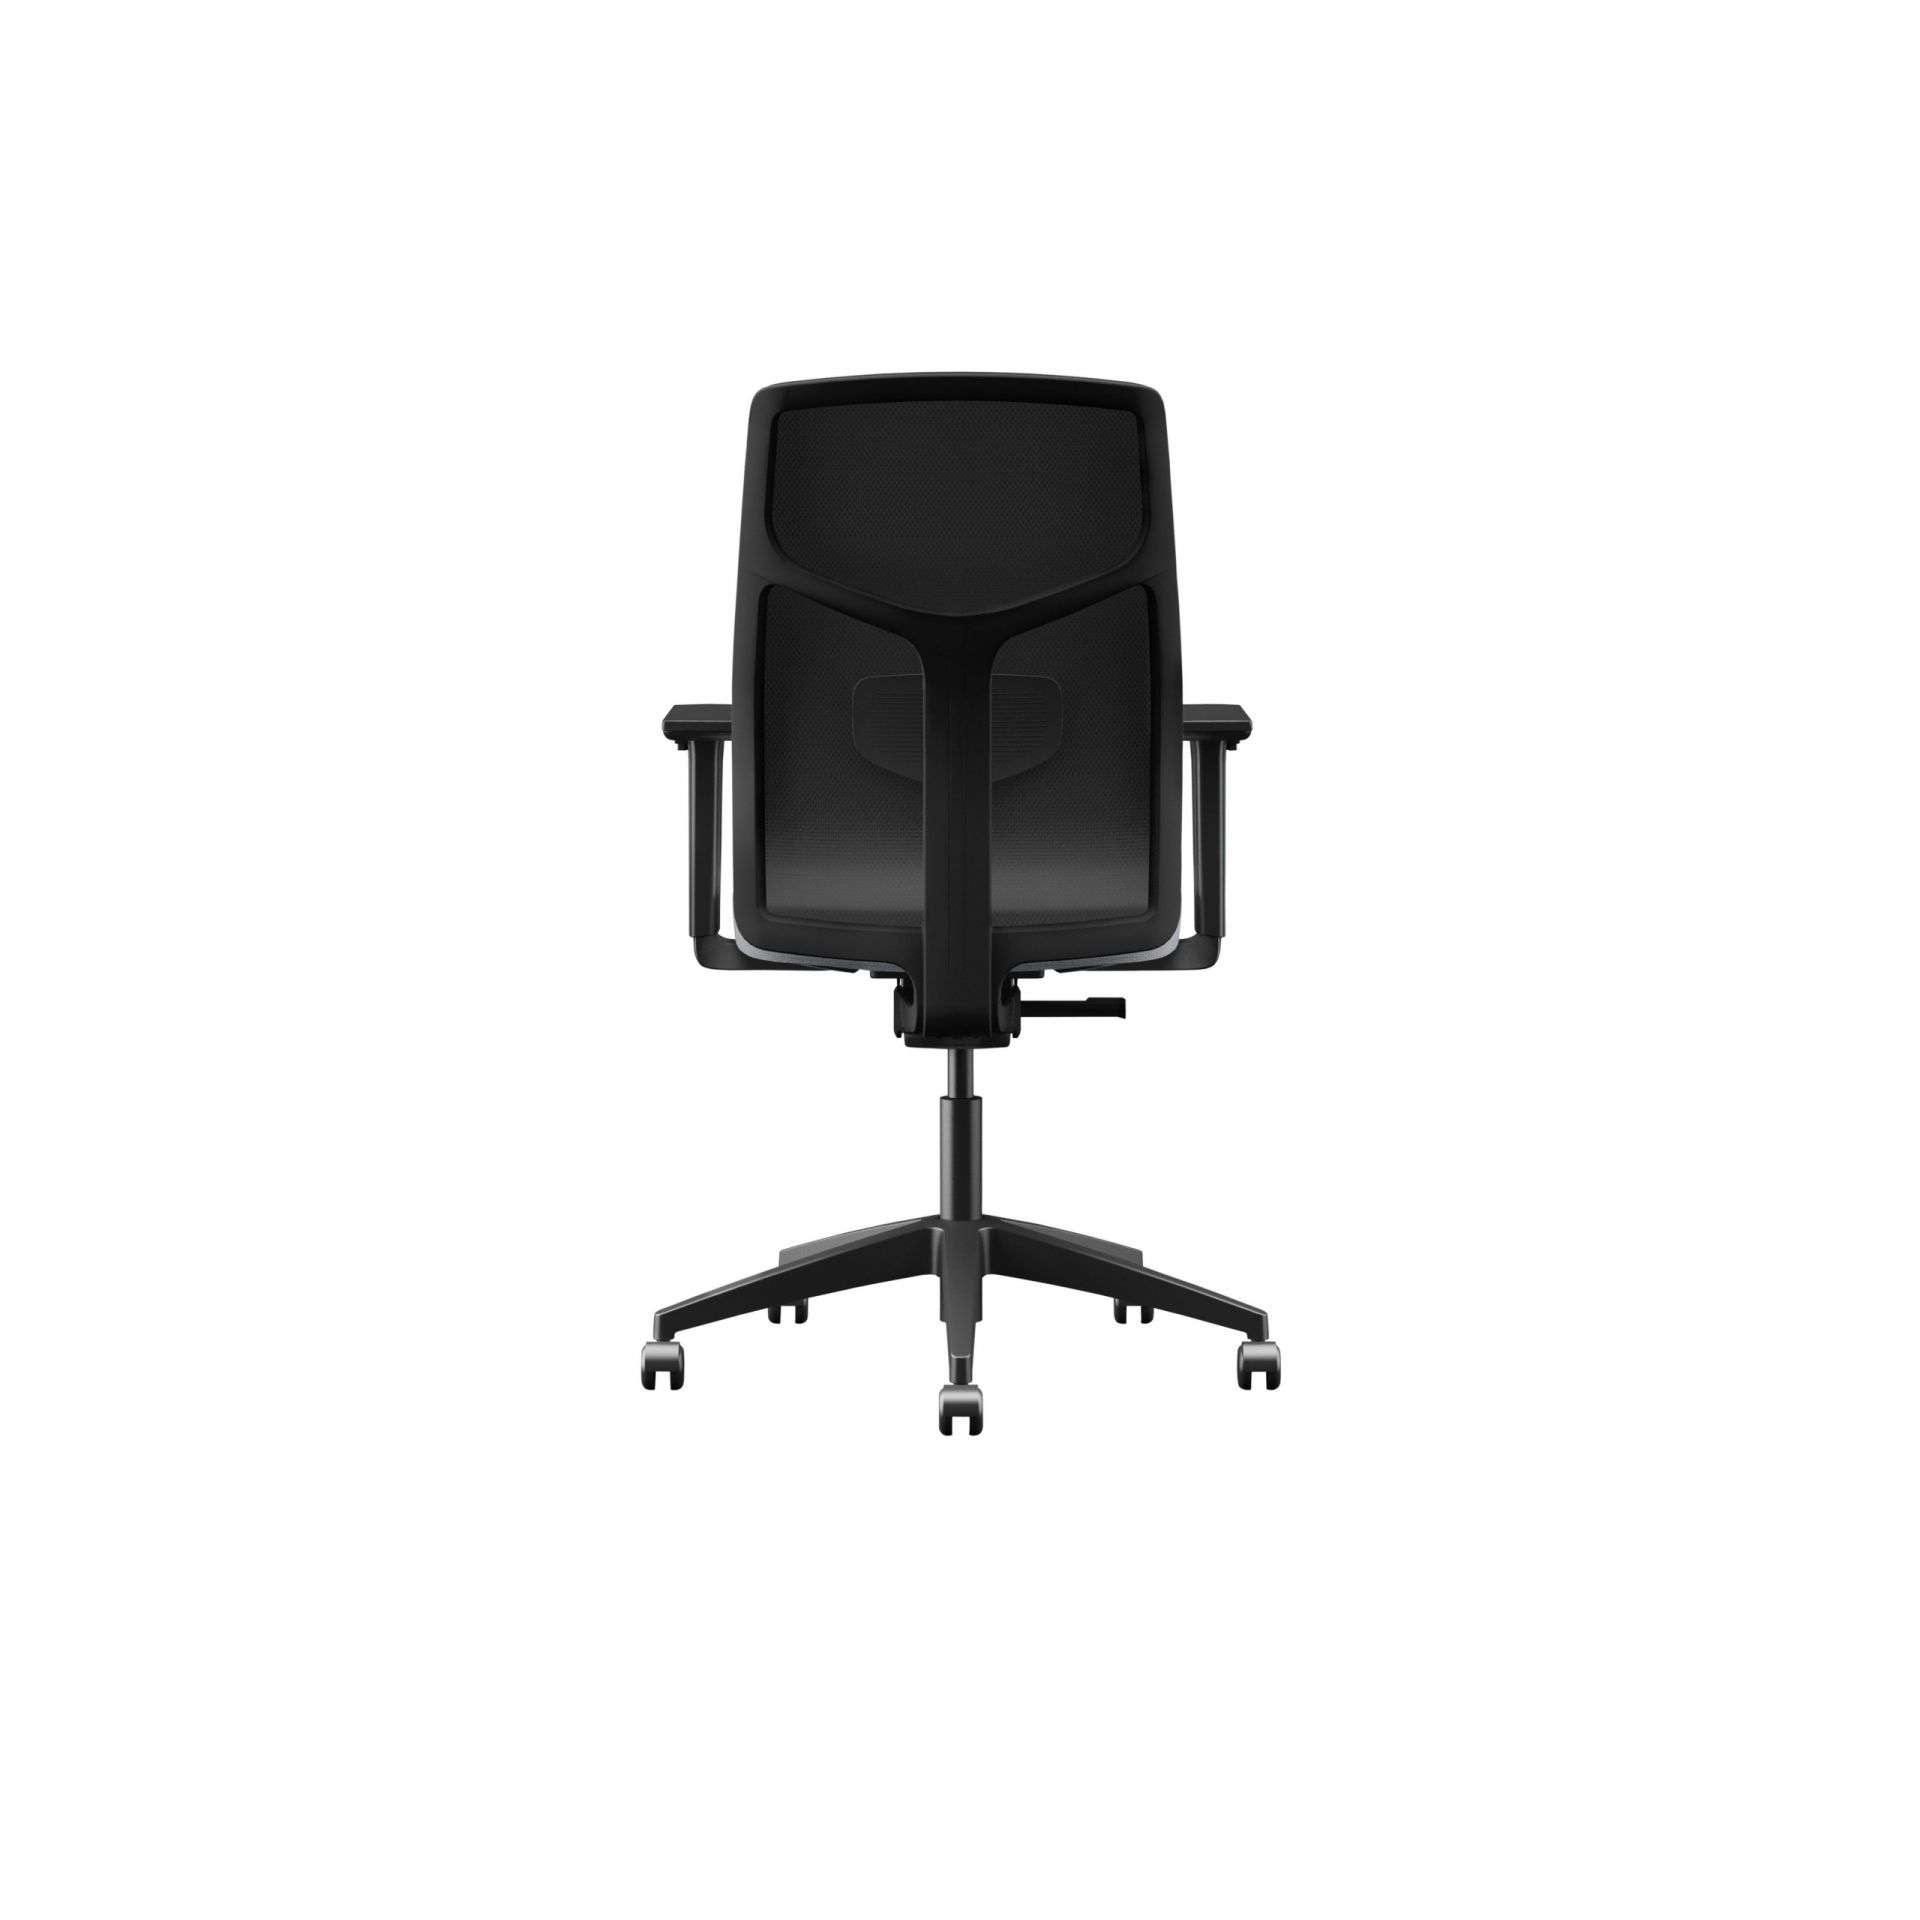 Yoyo Office chair with mesh back product image 7